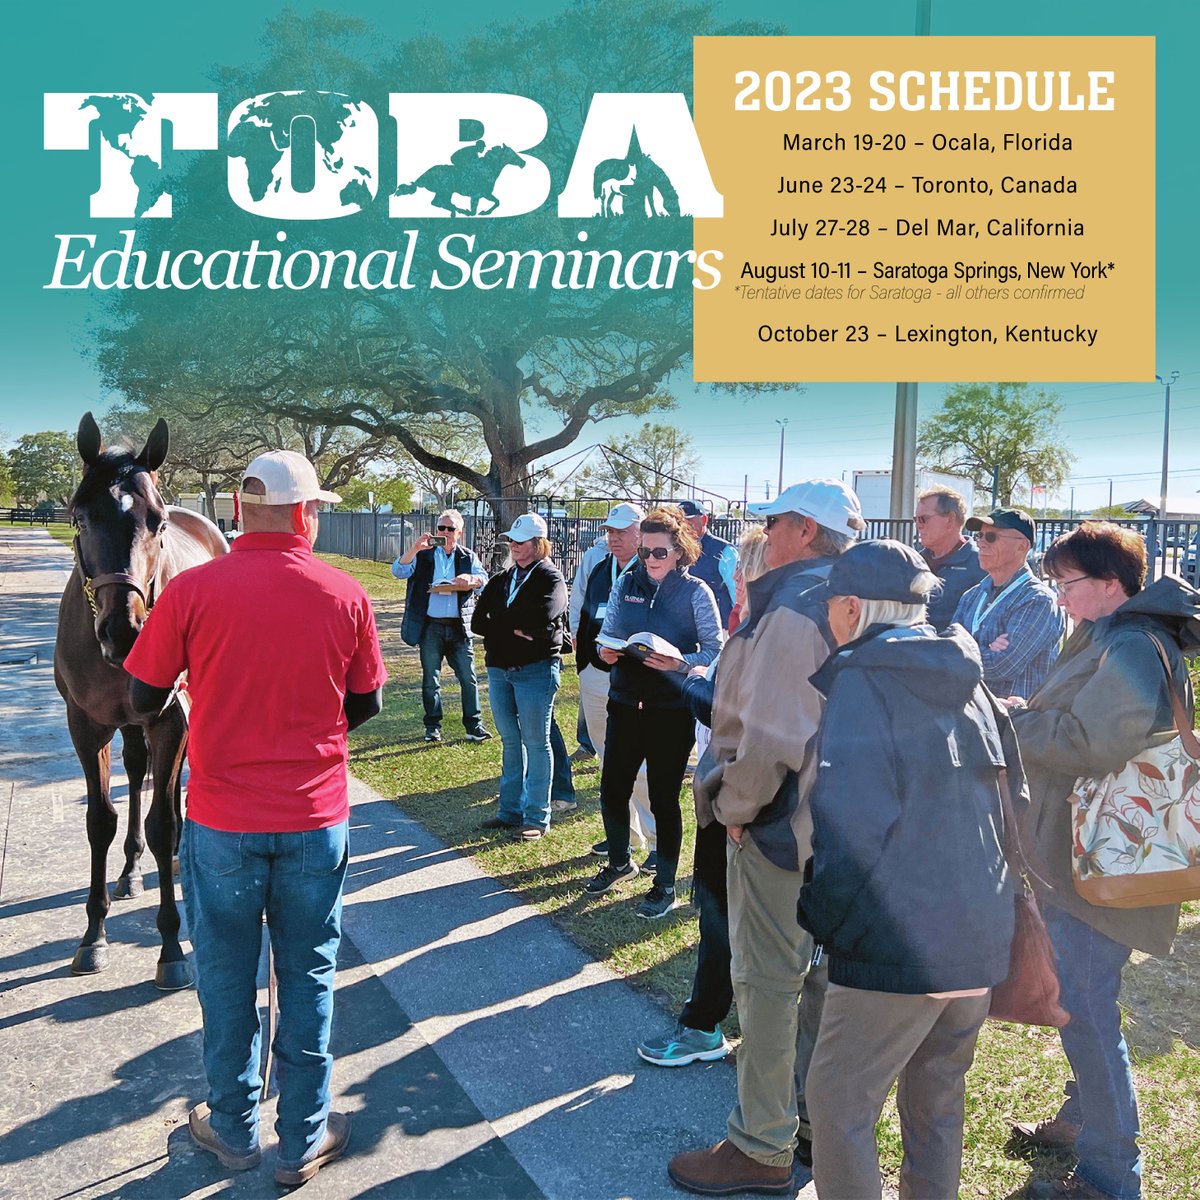 TOBA announced today the schedule for 2023 educational seminars. Read the full press release here: bit.ly/3ZMeVkr
#ThoroughbredRacing #HorseRacing #Thoroughbreds #EducationalSeminar  #NewRacehorseOwners #OwnershipSeminar #ThoroughbredOwners #ThoroughbredBreeders #Racing